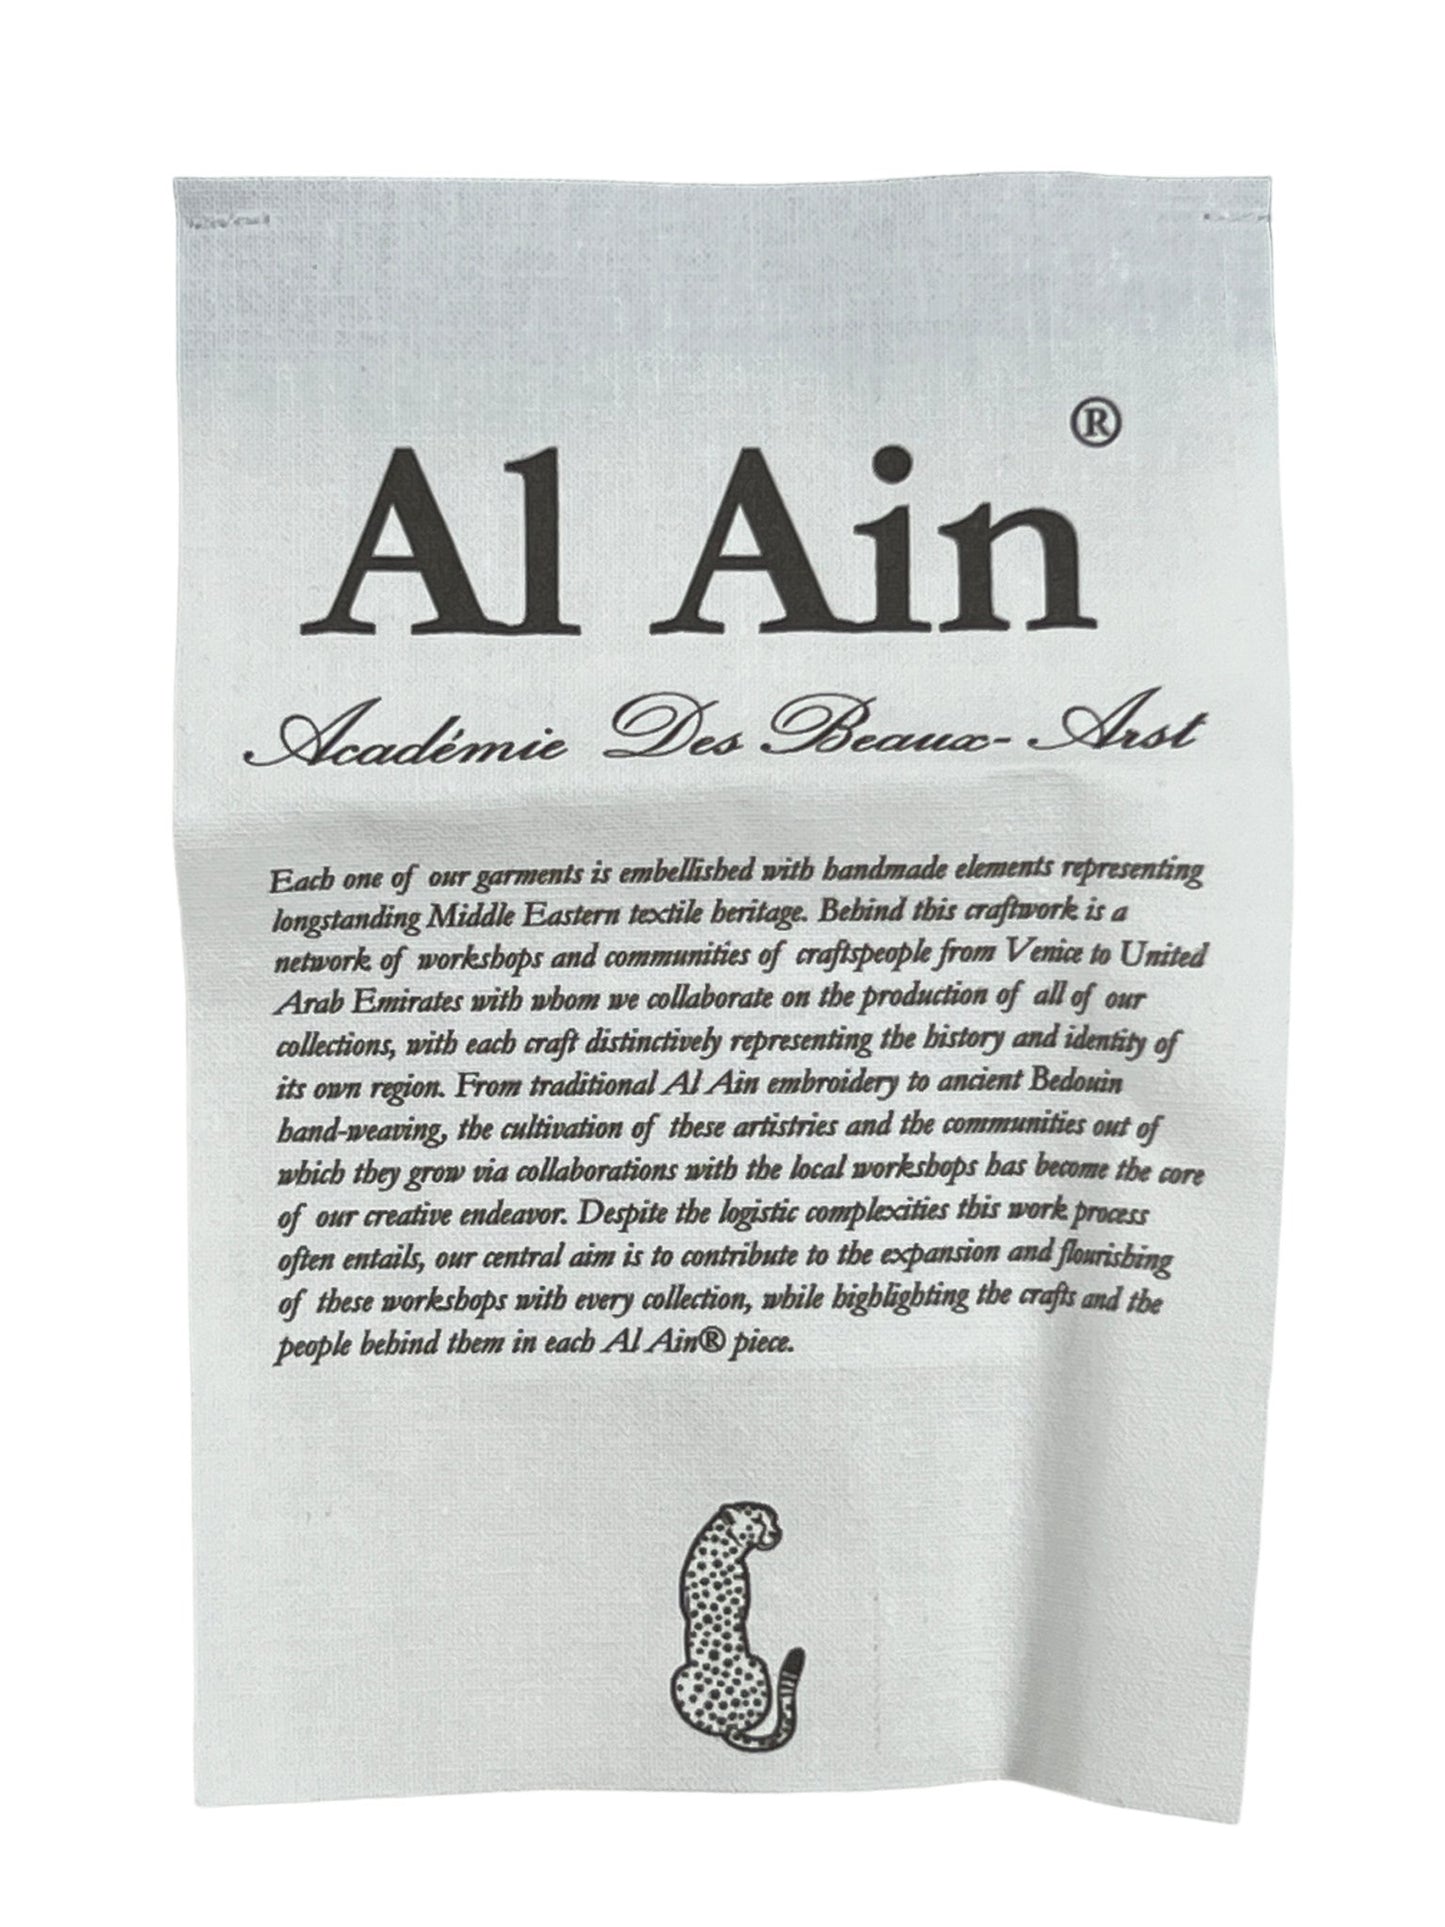 A white label with the embroidered brand name "AL AIN" and an informative paragraph about the garments' craftsmanship and the brand's dedication to traditional Middle Eastern techniques, featuring the product "AL AIN AMHX S121 PEACOCK BLANC.